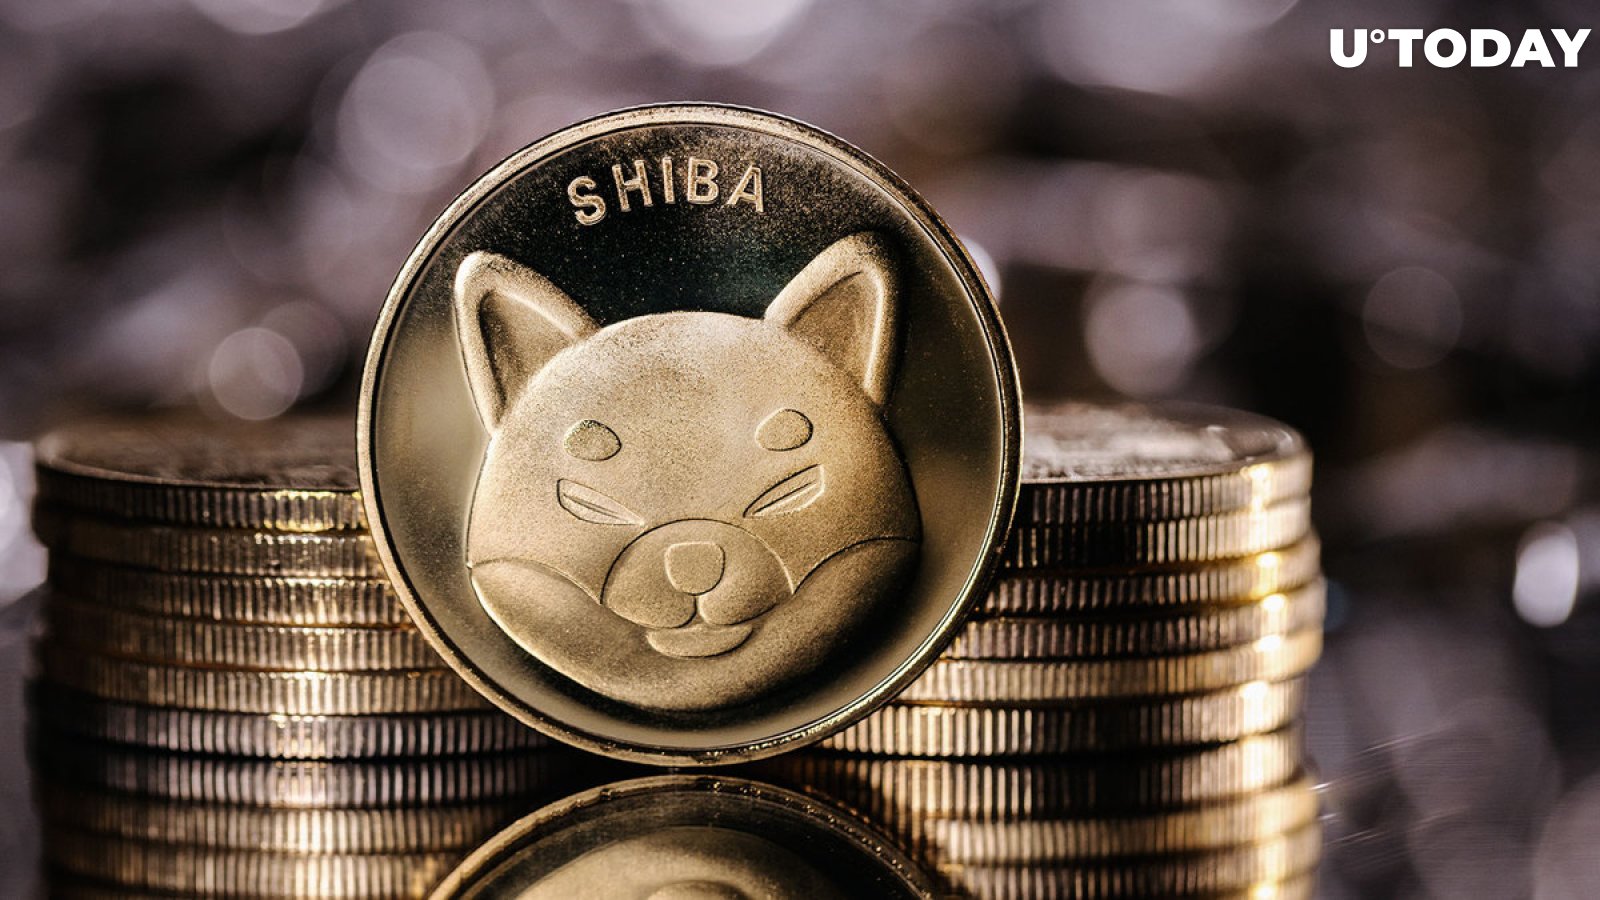 Shiba Inu: Mysterious "Buying" Activity Spotted, Here's What Happened